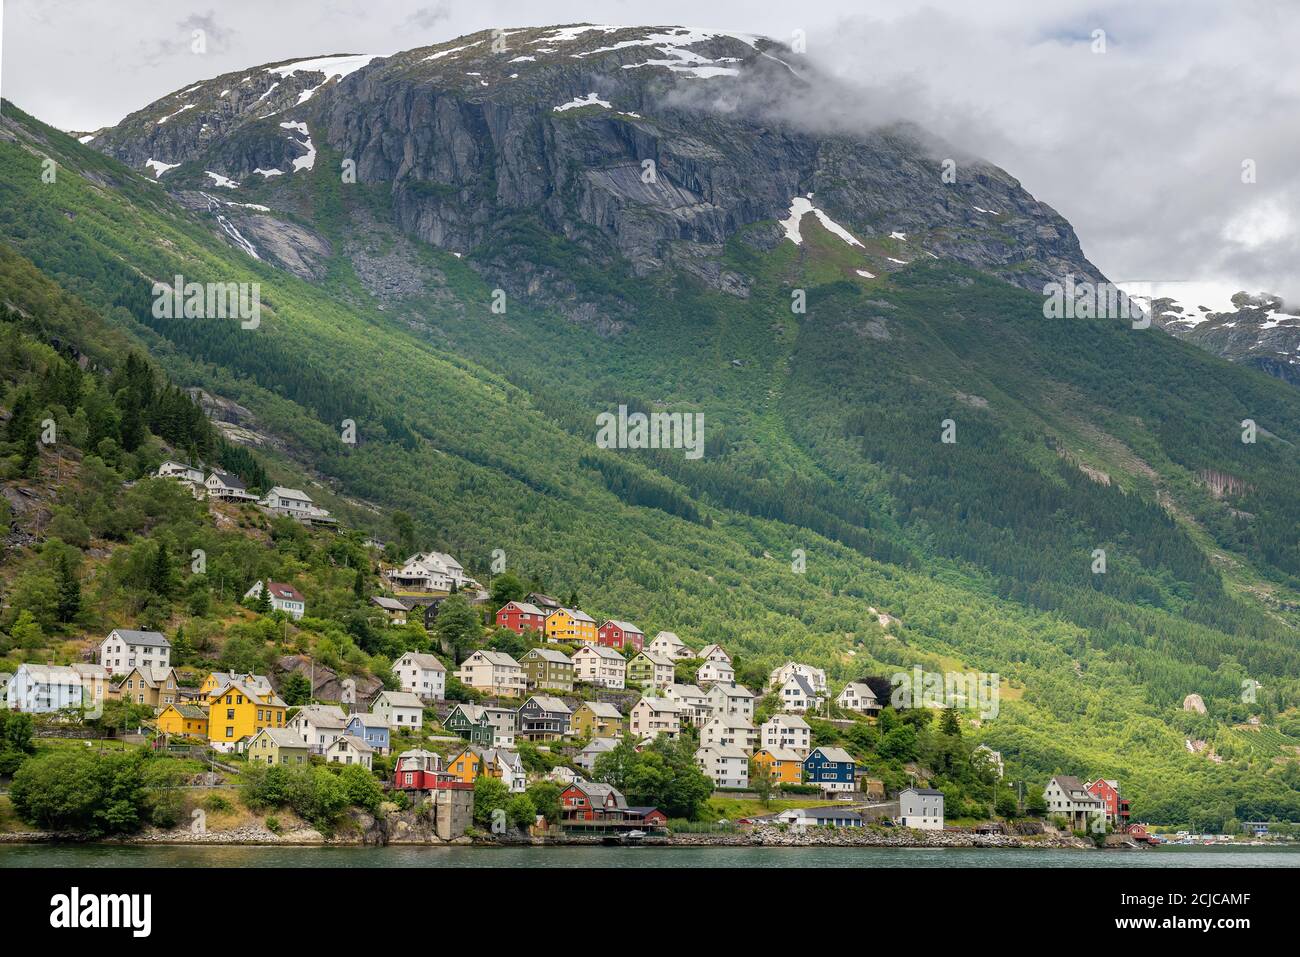 A scenic view of a village with different colored houses in Odda, Norway. Stock Photo